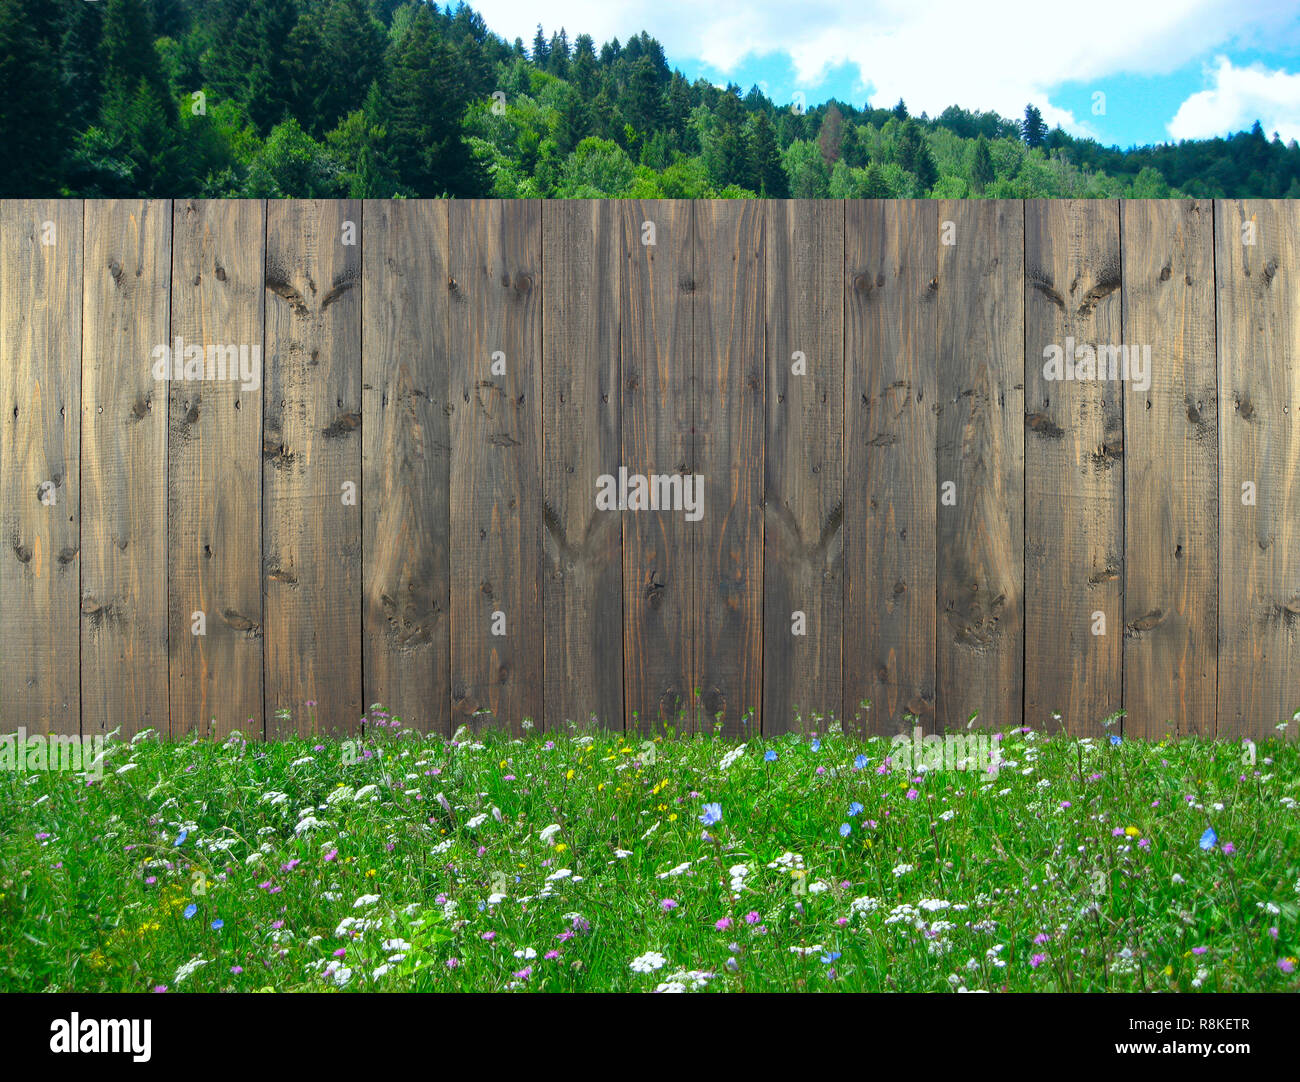 Wooden fence standing on summer lawn with flowers. Fence made from dark boards on grass. Summer meadow along rural fence Stock Photo